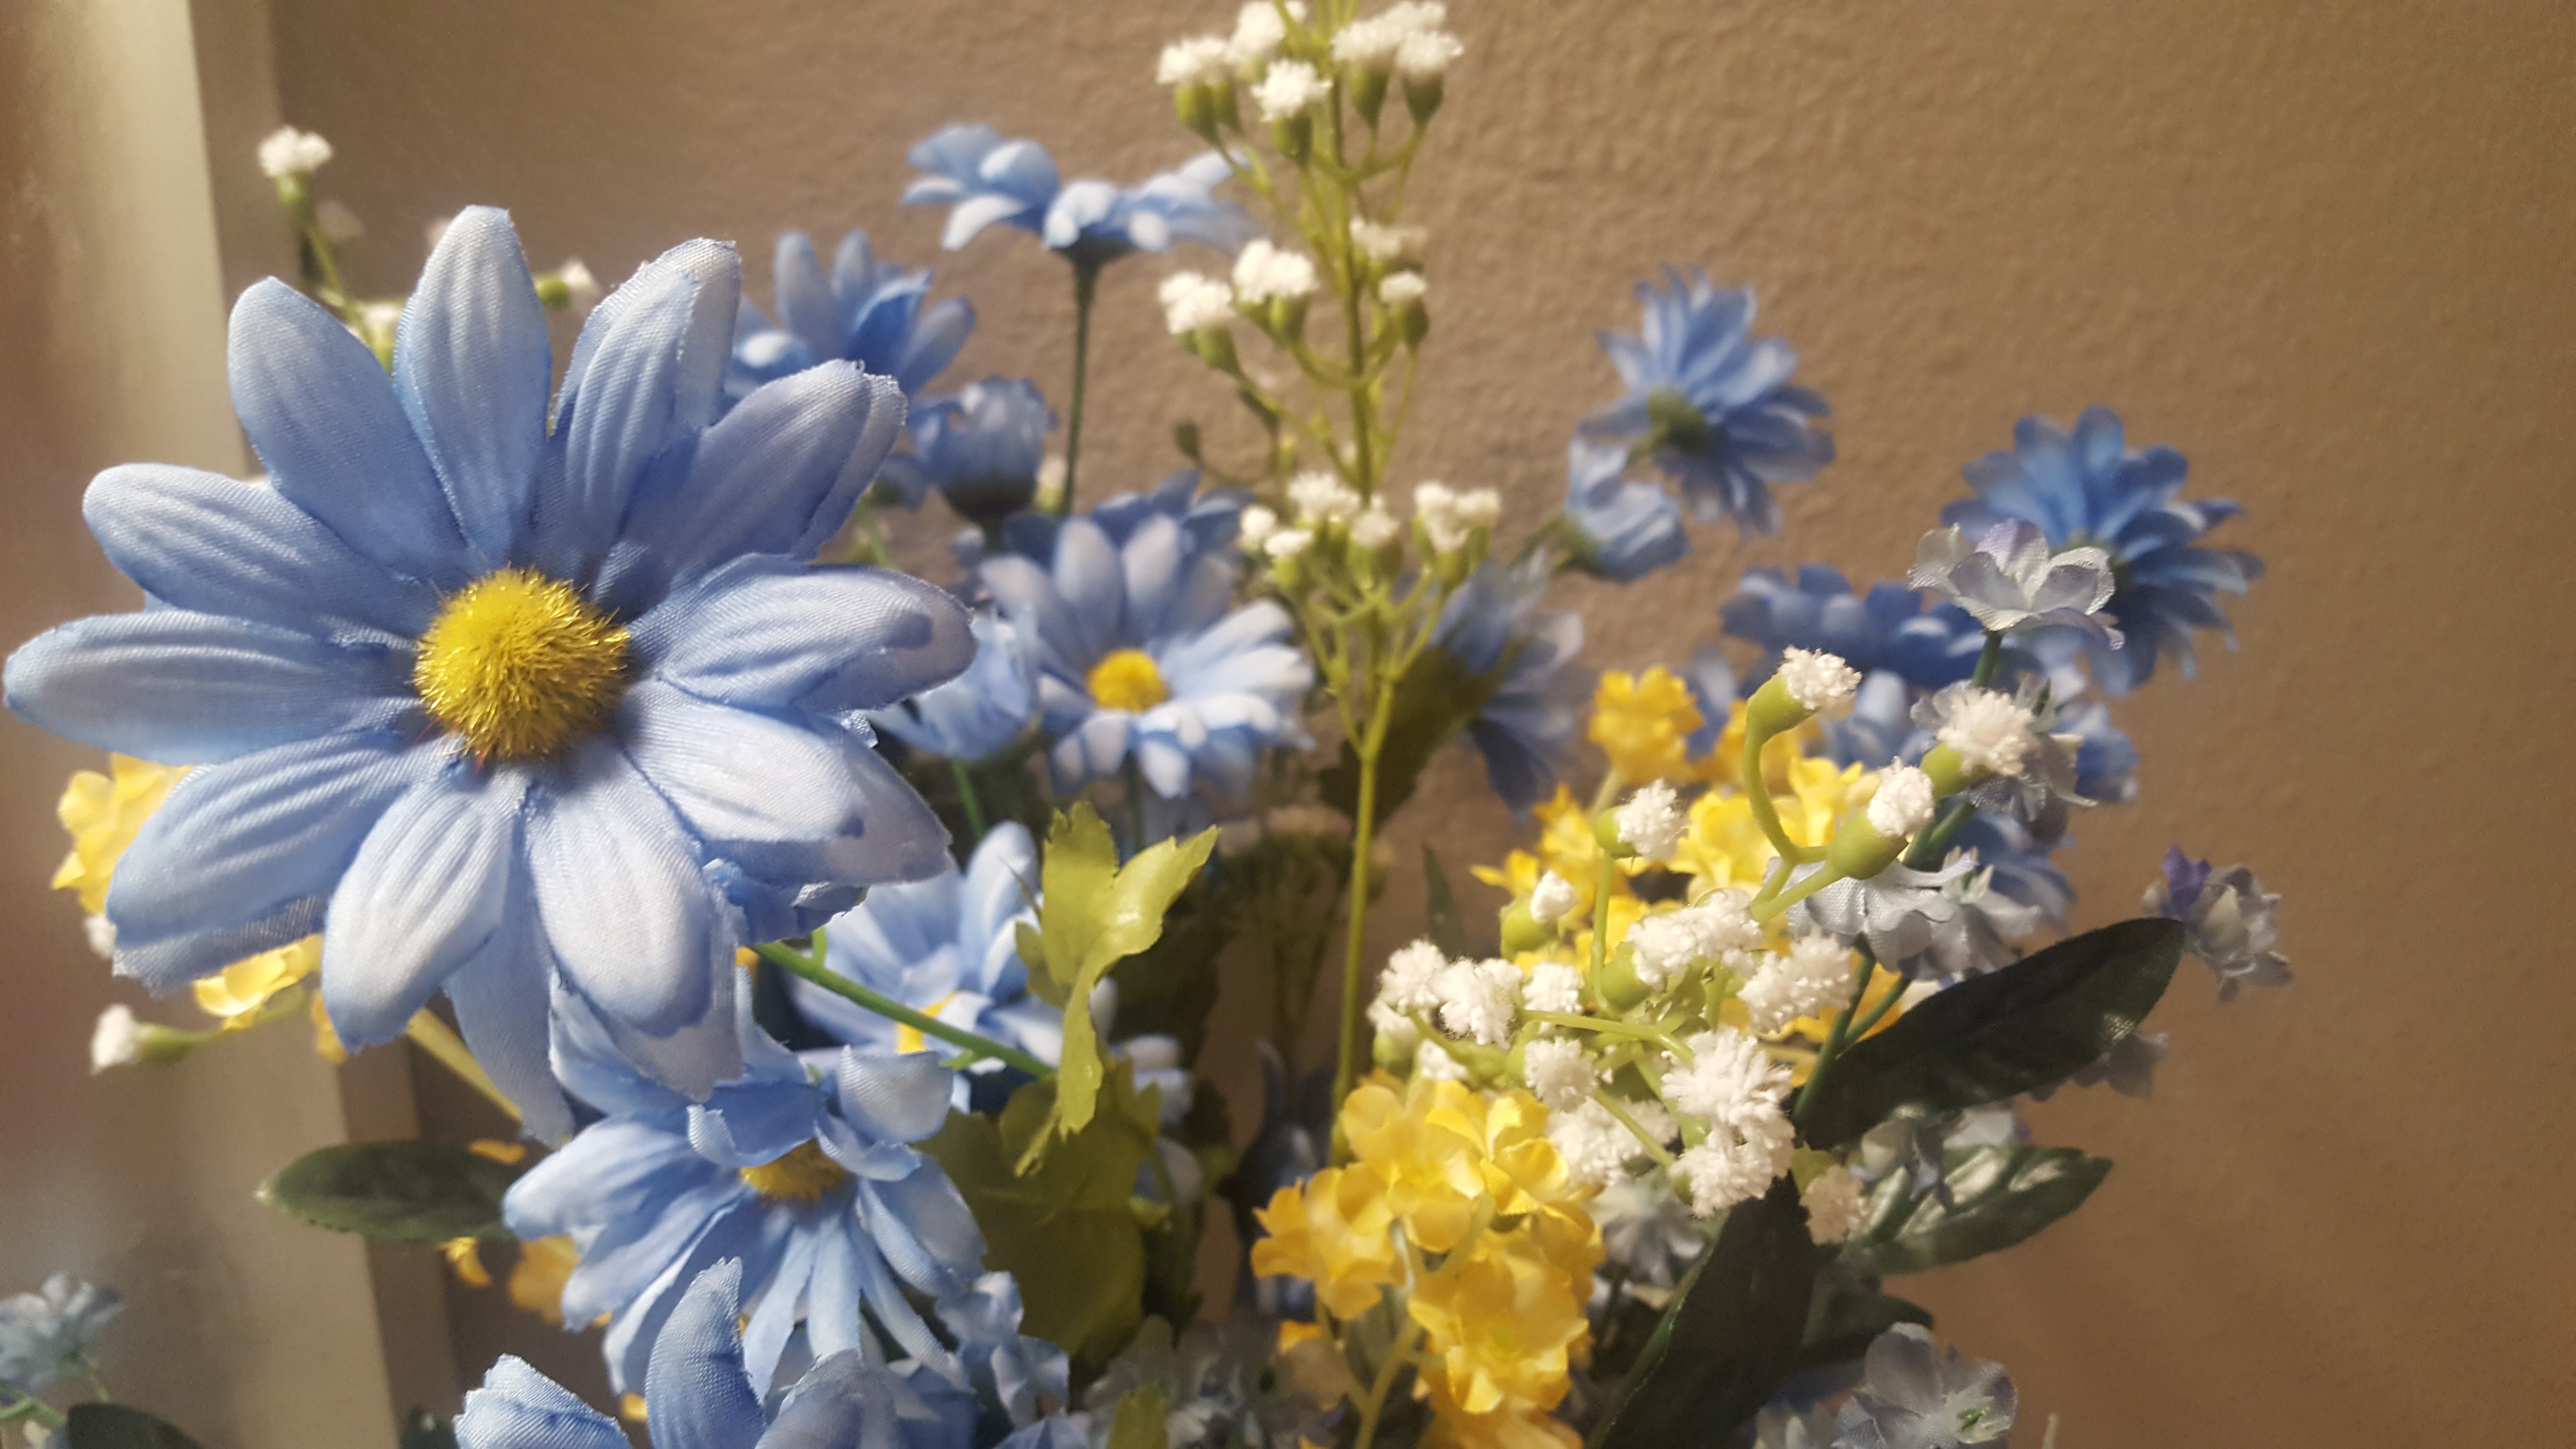 Bouquet with a mixed arrangement of blue, yellow and white flowers is sitting on a bathroom counter for decoration